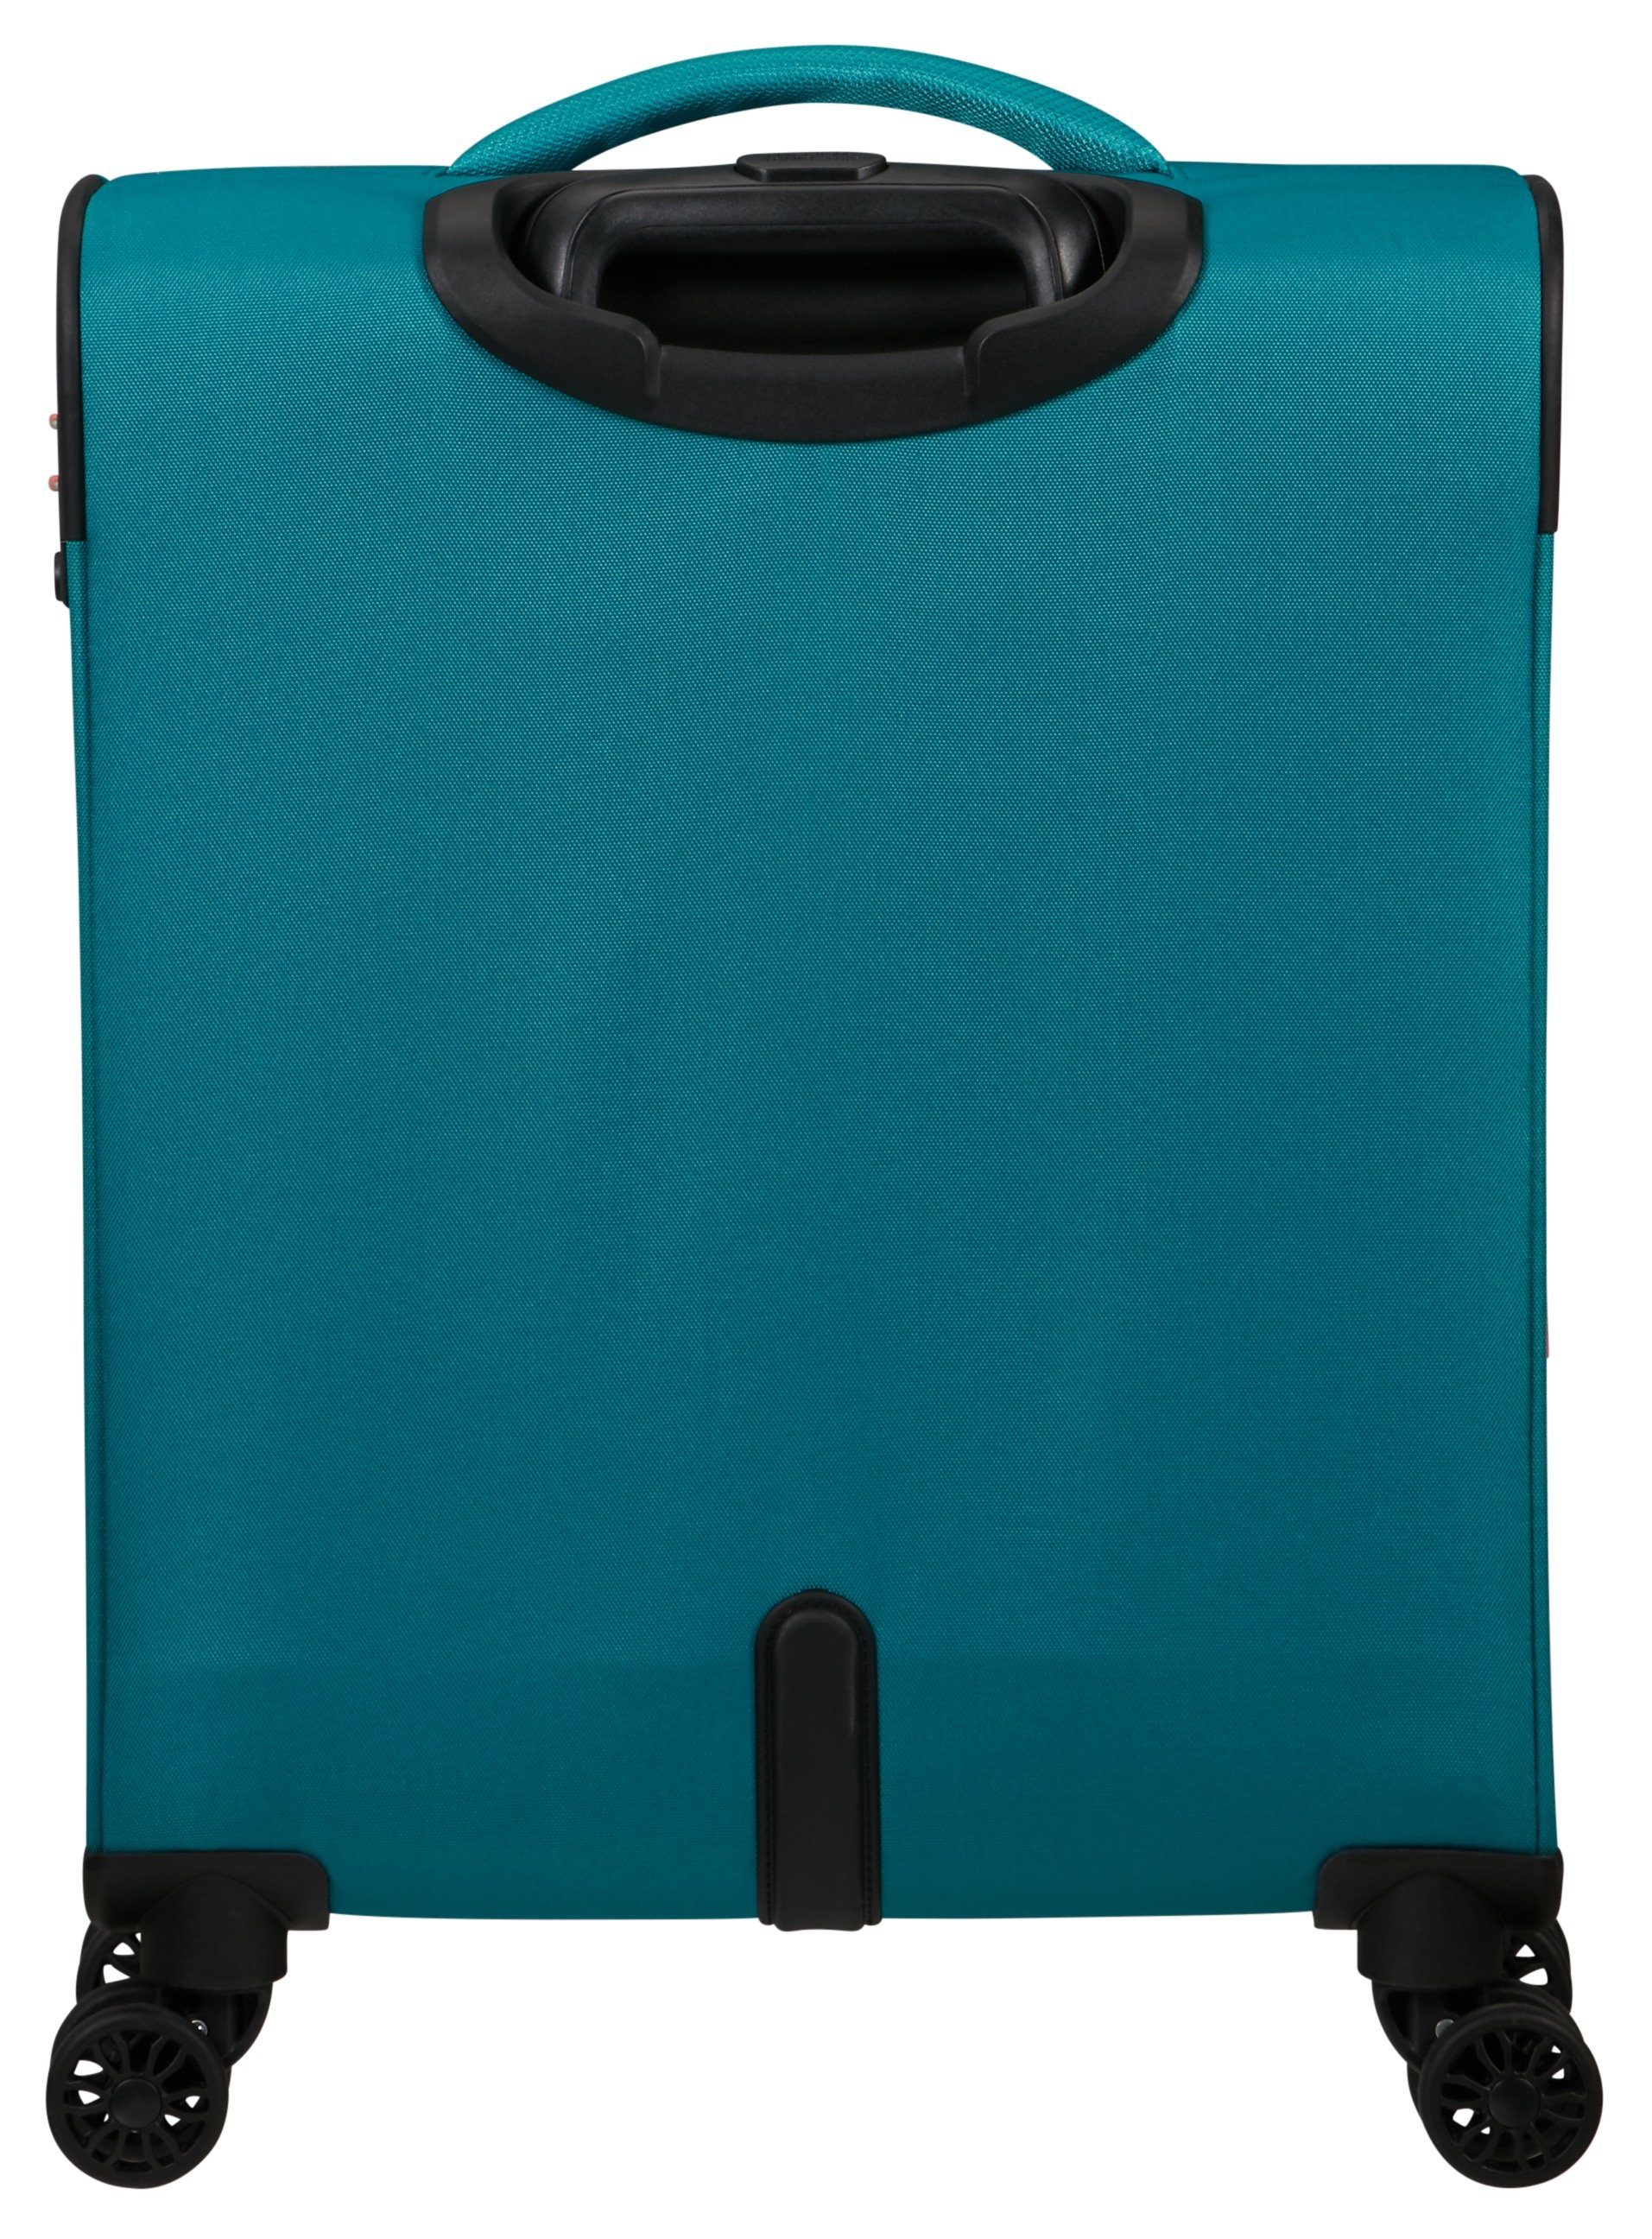 Spinner 4 stone American teal Tourister® 55, Rollen Koffer PULSONIC